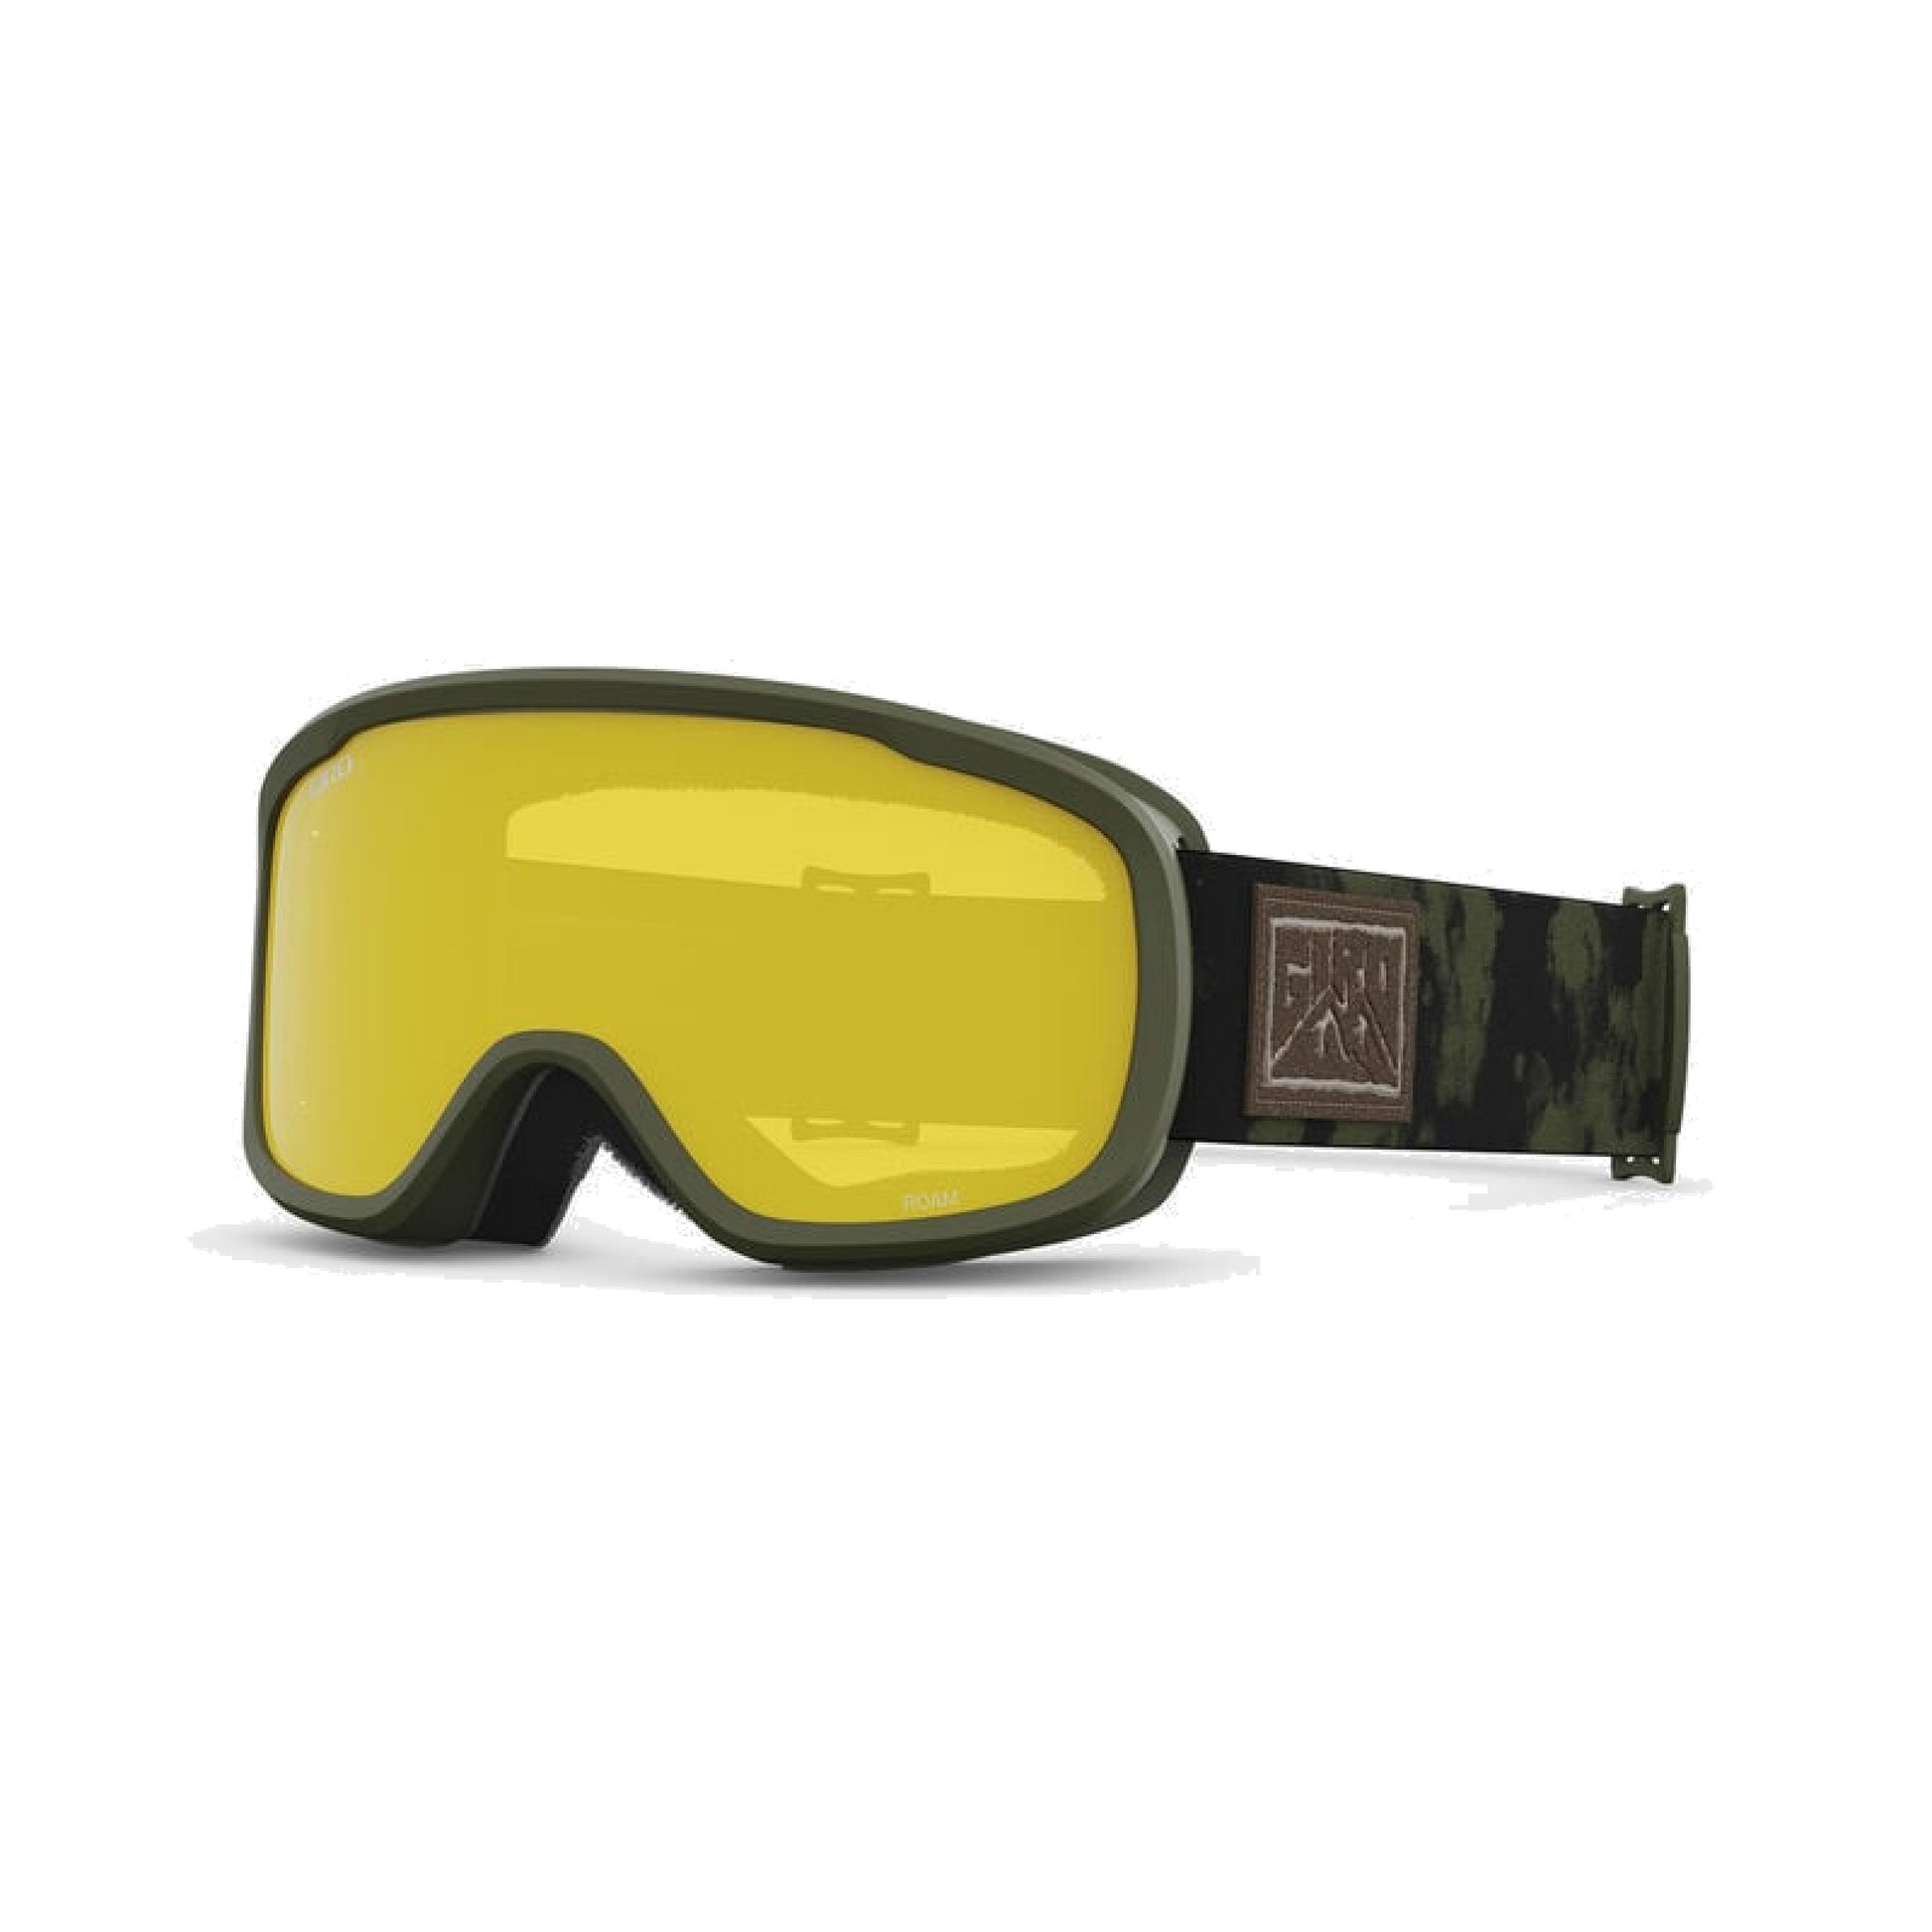 Giro Roam AF Snow Goggles Trail Green Cloud Dust Loden Green Snow Goggles